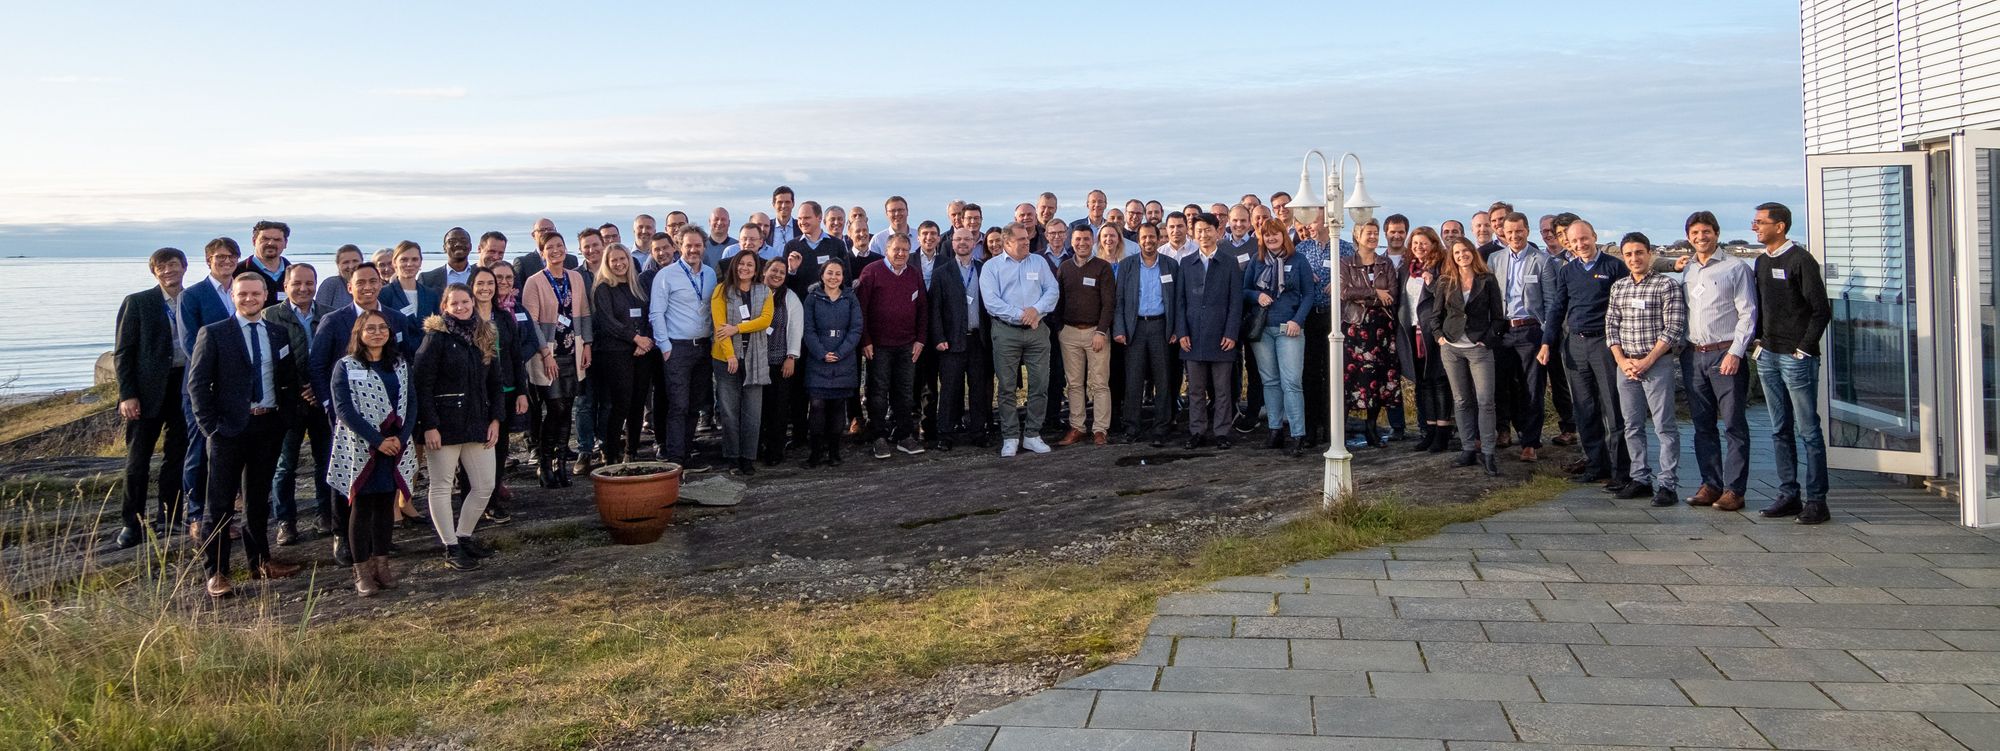 Participants of the 1st Geosteering Workshop by NORCE and NFES, November 2019